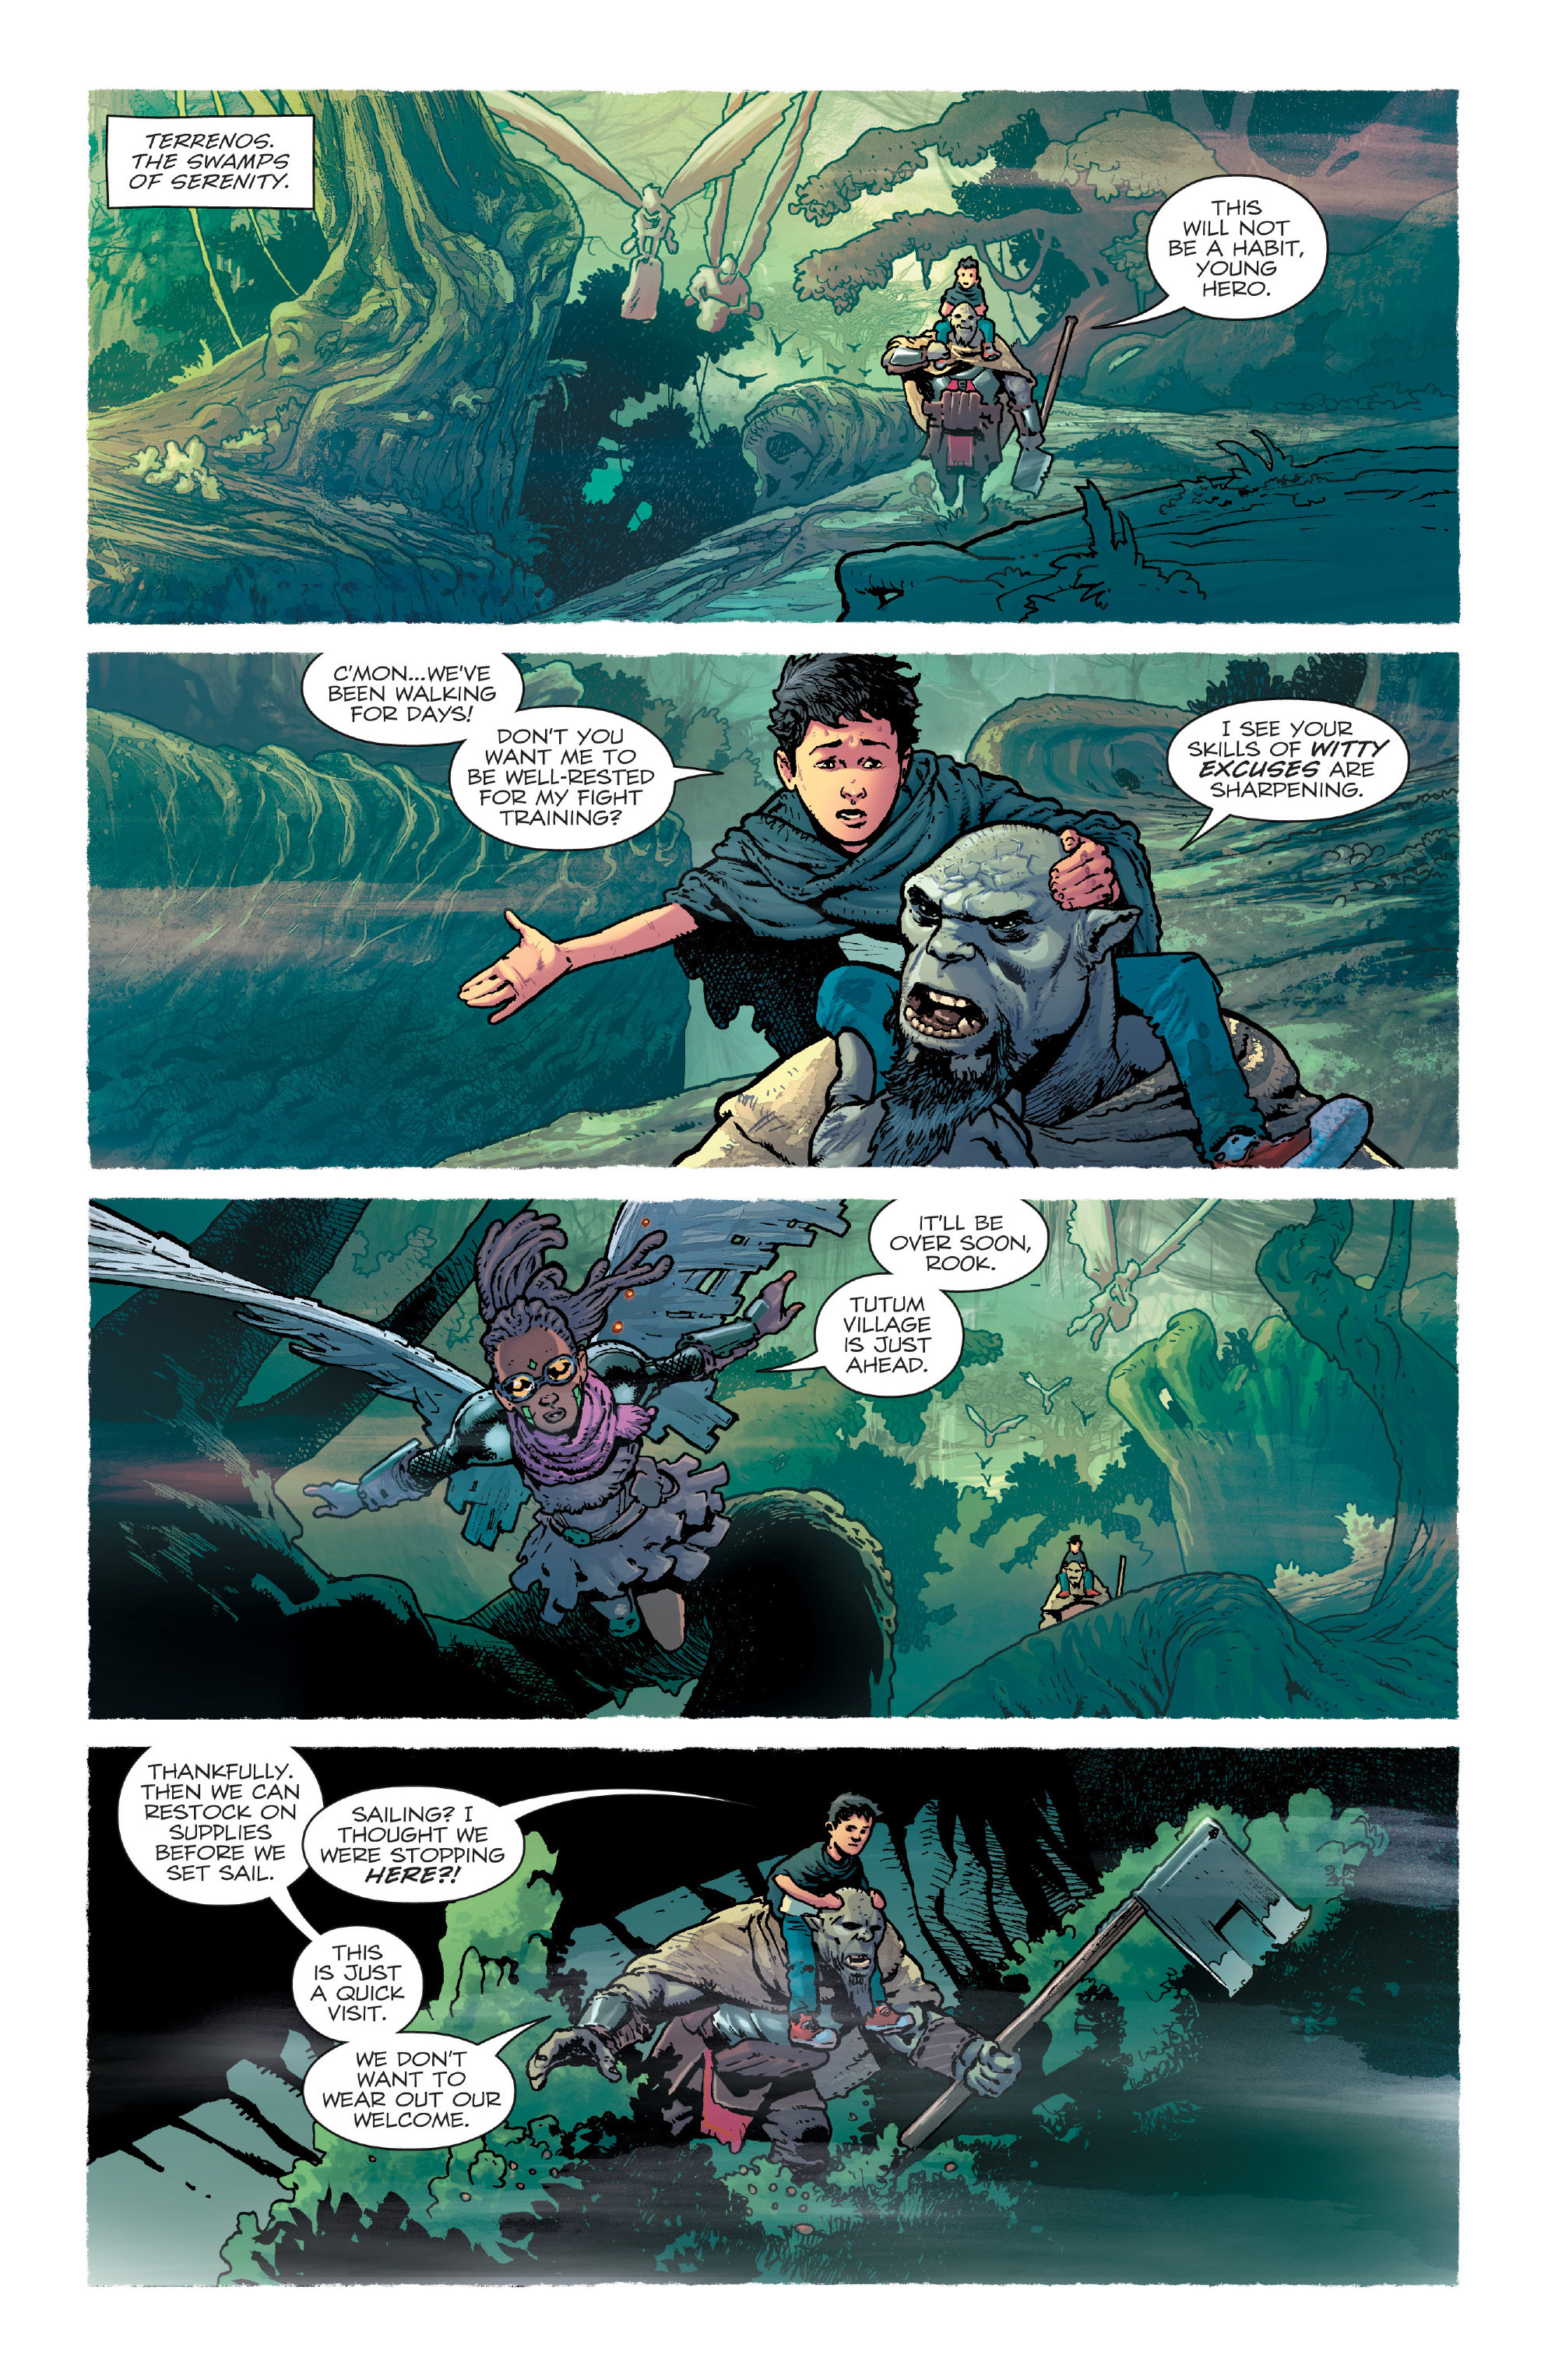 Birthright (2014-): Chapter 9 - Page 3